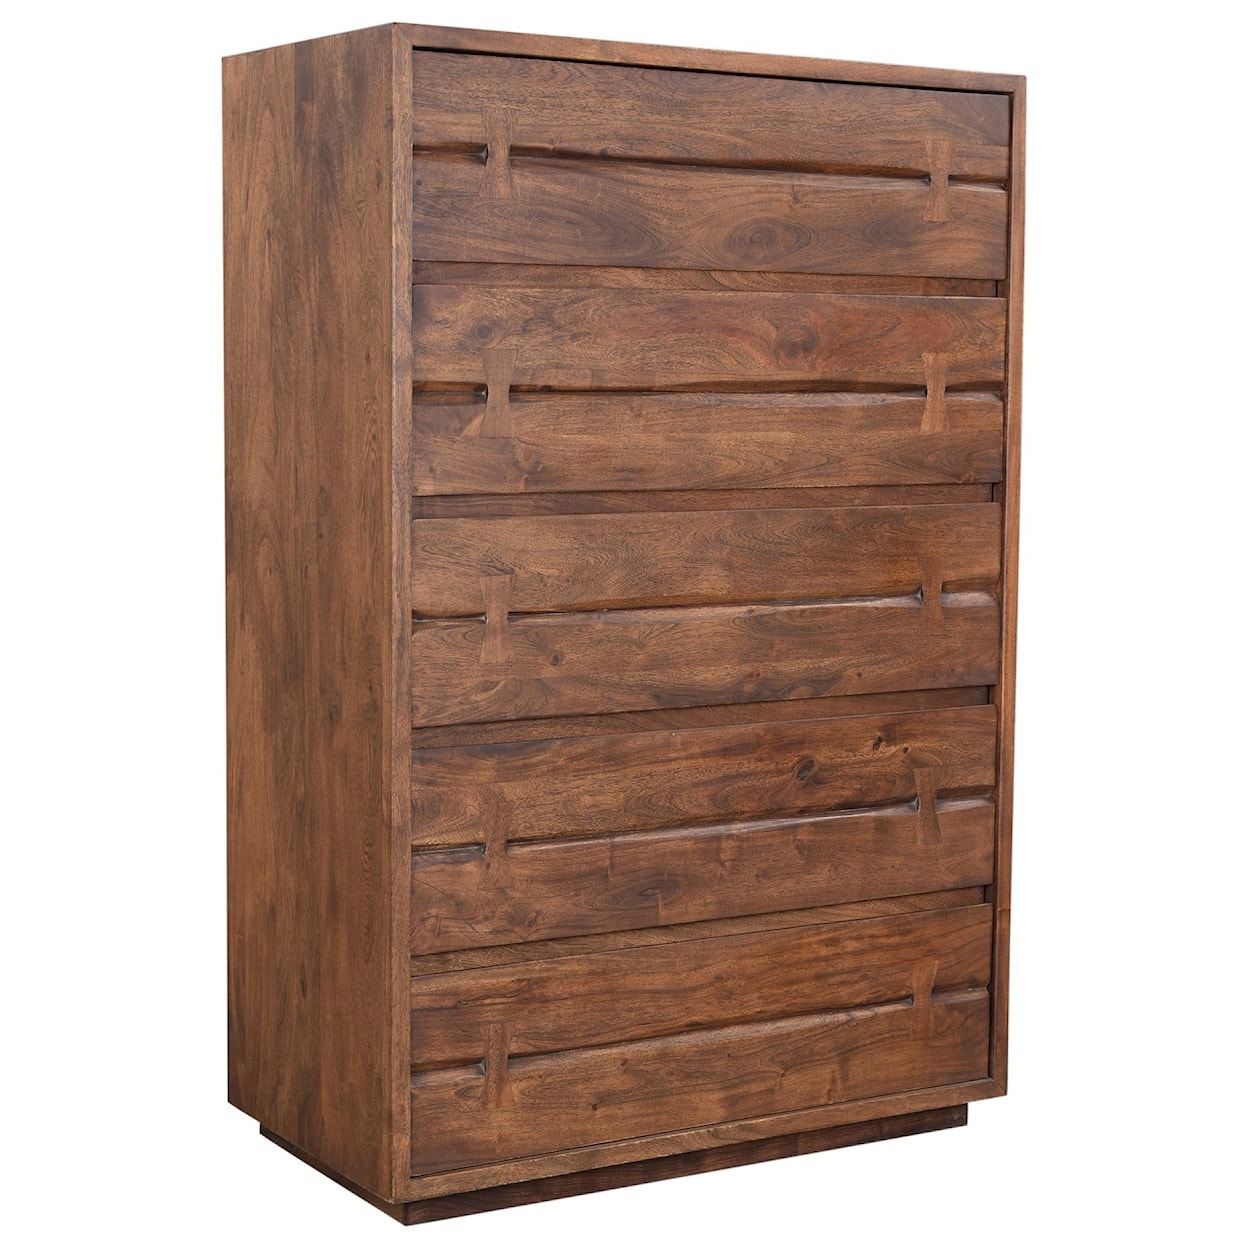 Moe's Home Collection Madagascar Chest of Drawers